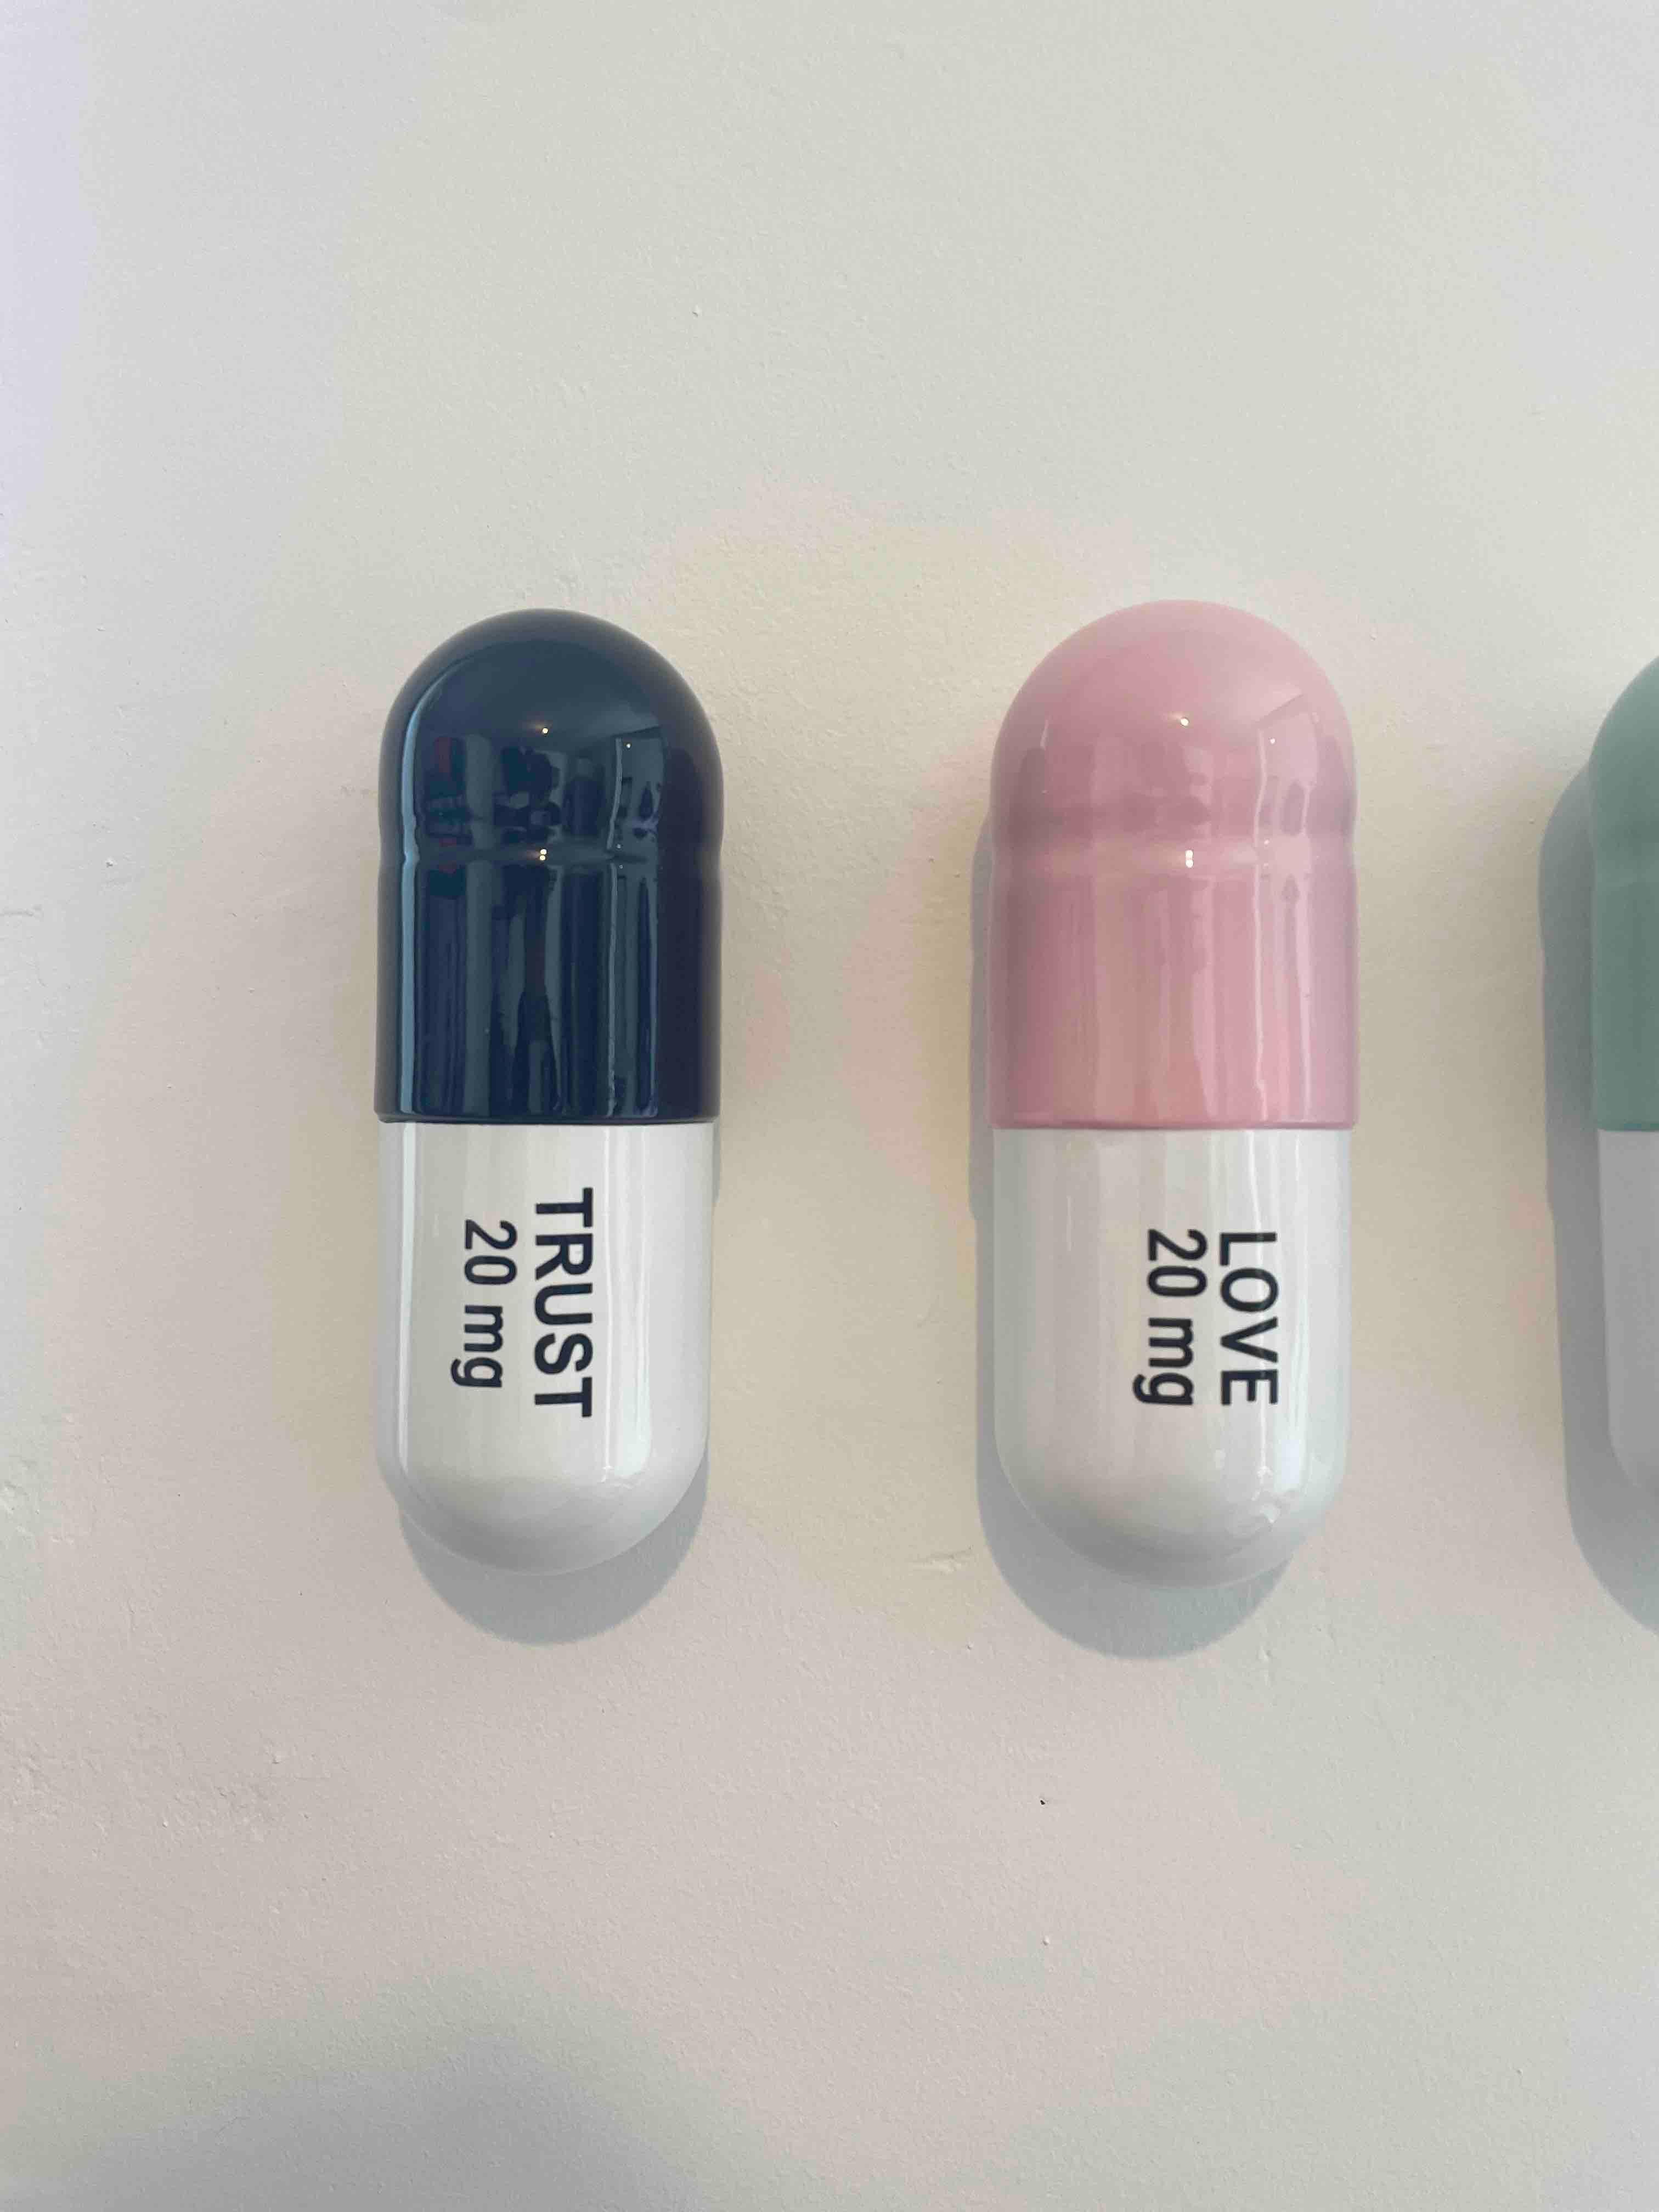 20 MG Trust, Love, Freedom pill Combo (black, pink, mint green) - Sculpture by Tal Nehoray